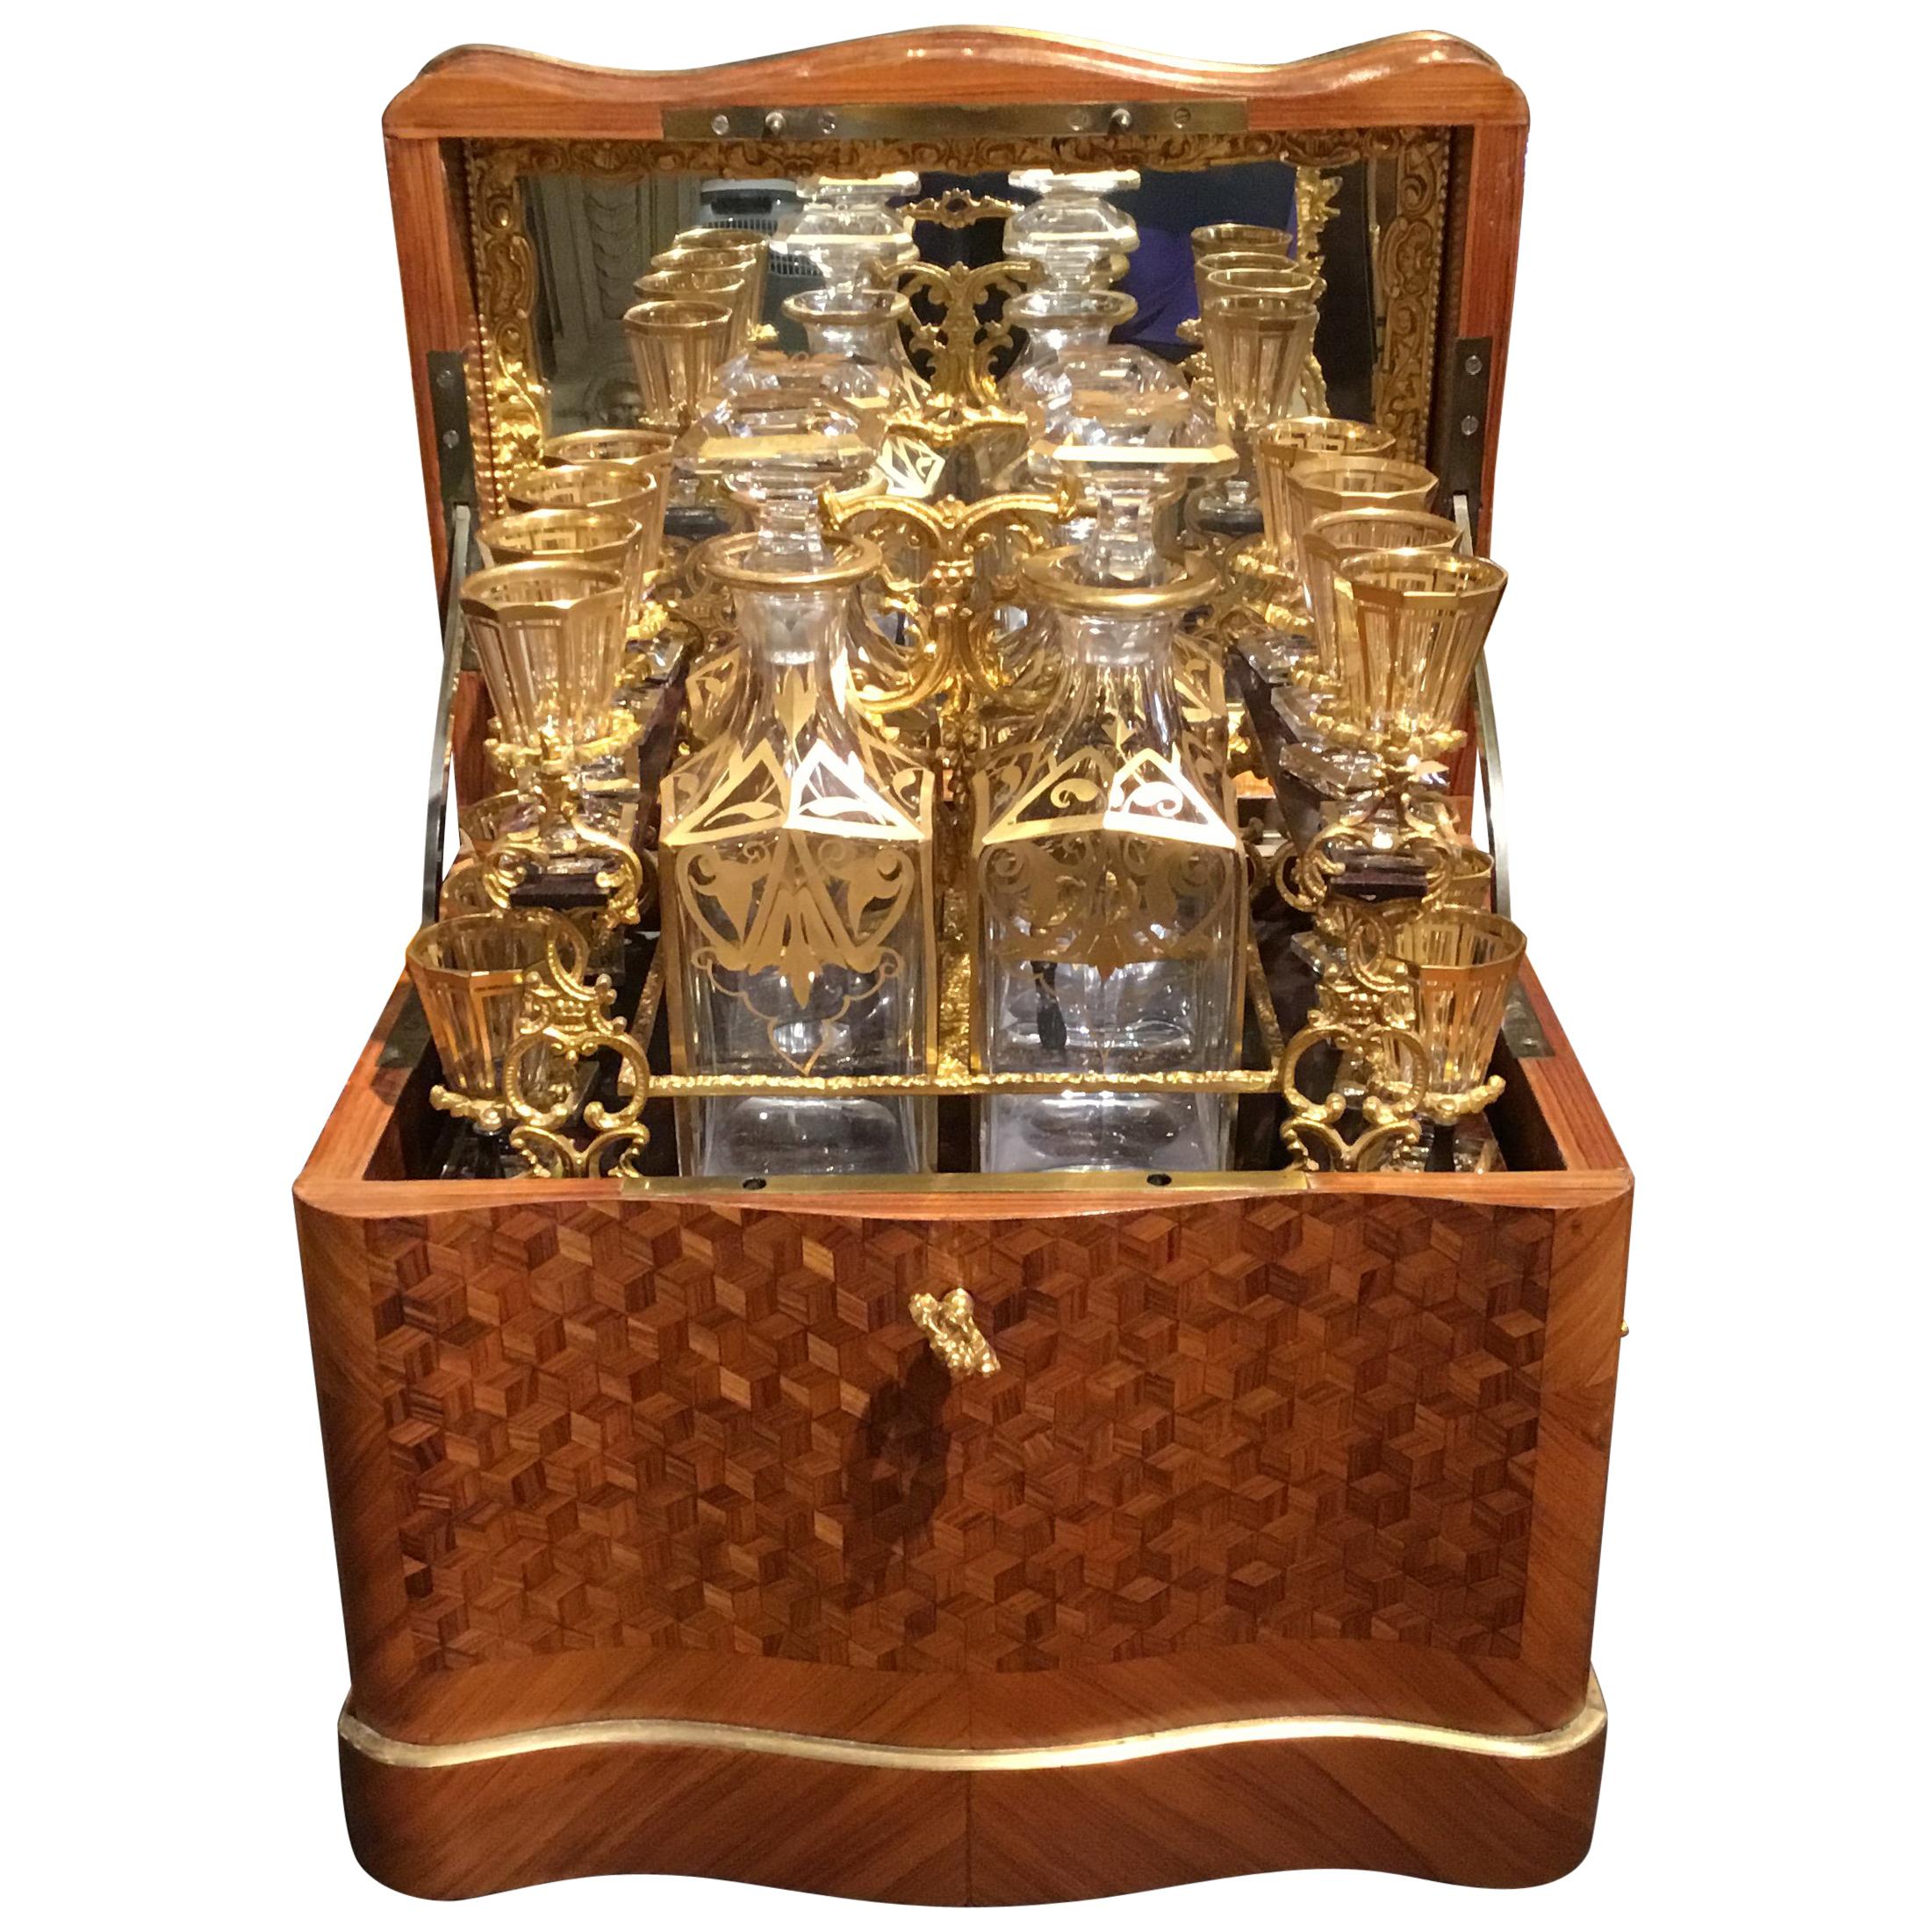 Tantalus Set of Rosewood, Kingwood and Tulipwood Complete with Baccarat Glasses